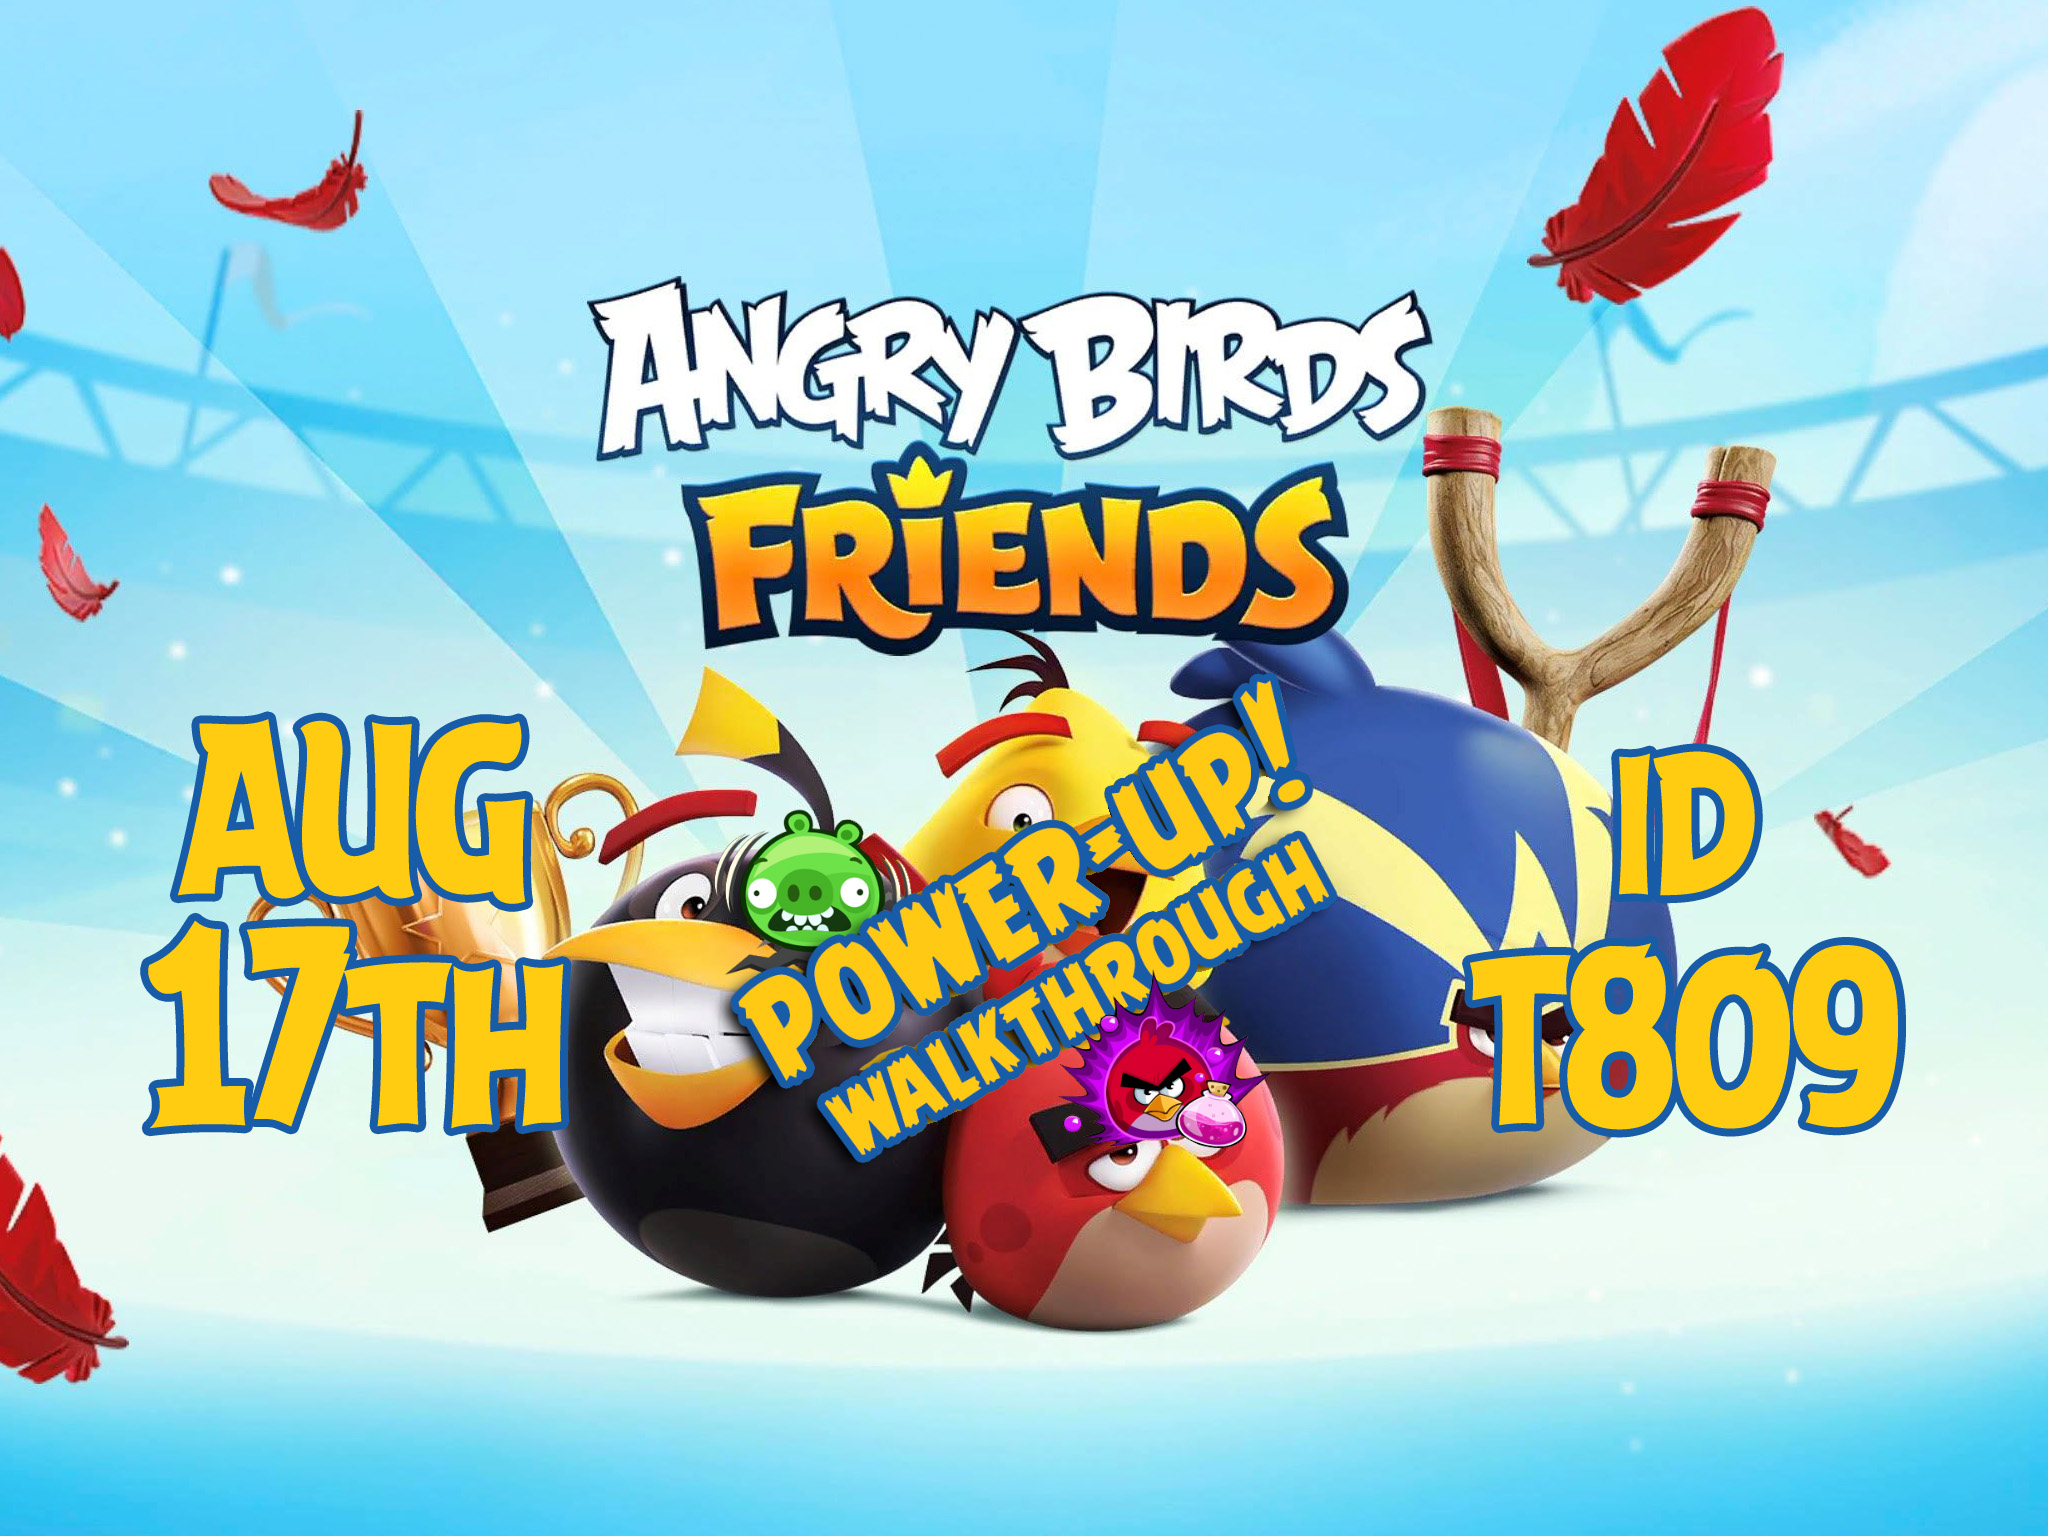 Angry-Birds-Friends-Tournament-T809-Feature-Image-PU